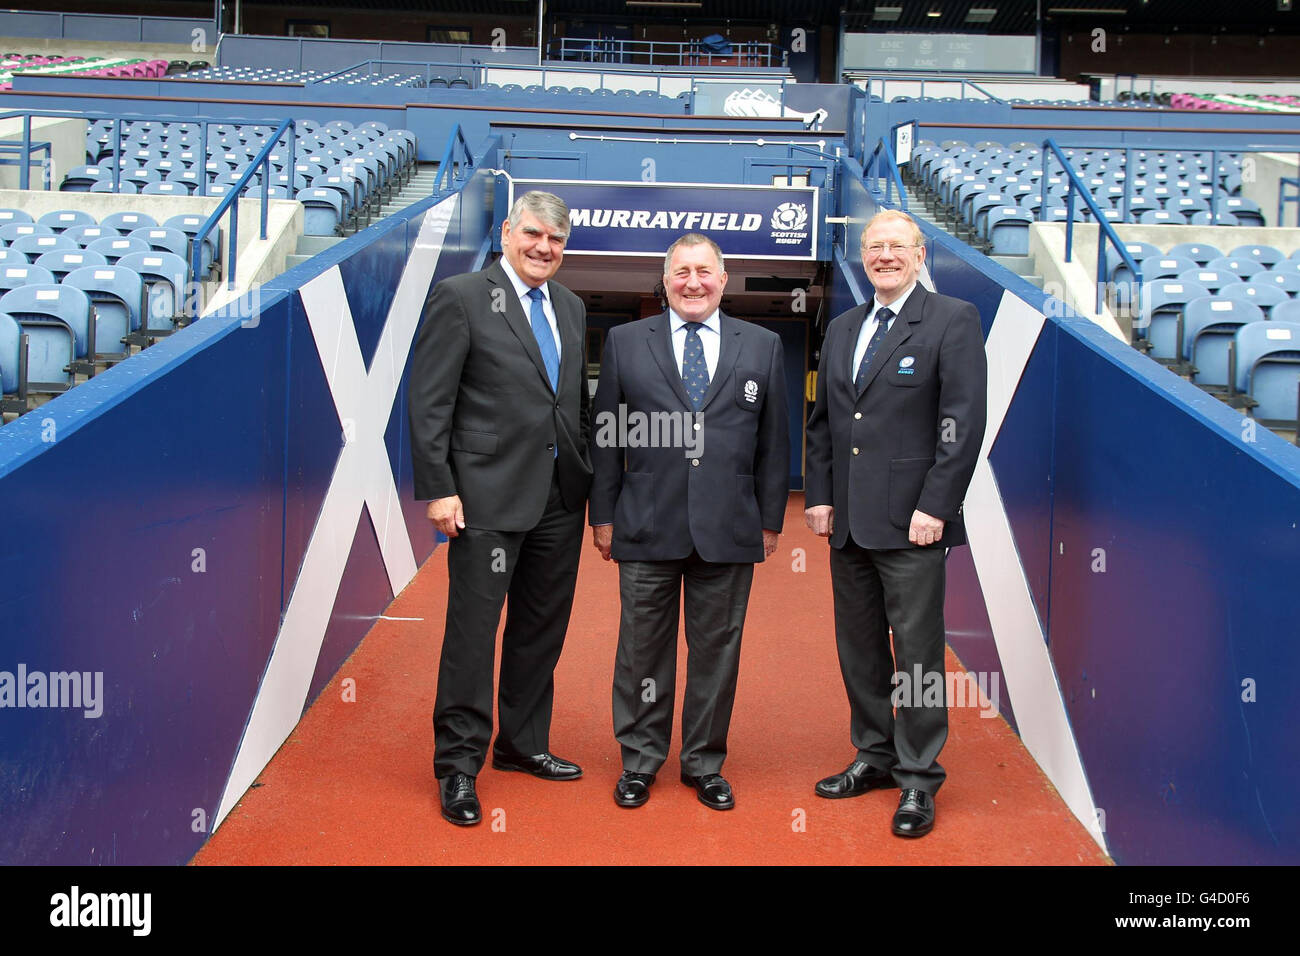 Scottish Rugby Union members Sir Moir Lockhead, Ian McLauchan (president) and Jock Millican (Non-Executive Director and Chief Executive) pose for photos prior to the Scottish Rugby Union AGM at Murrayfield, Edinburgh. Stock Photo